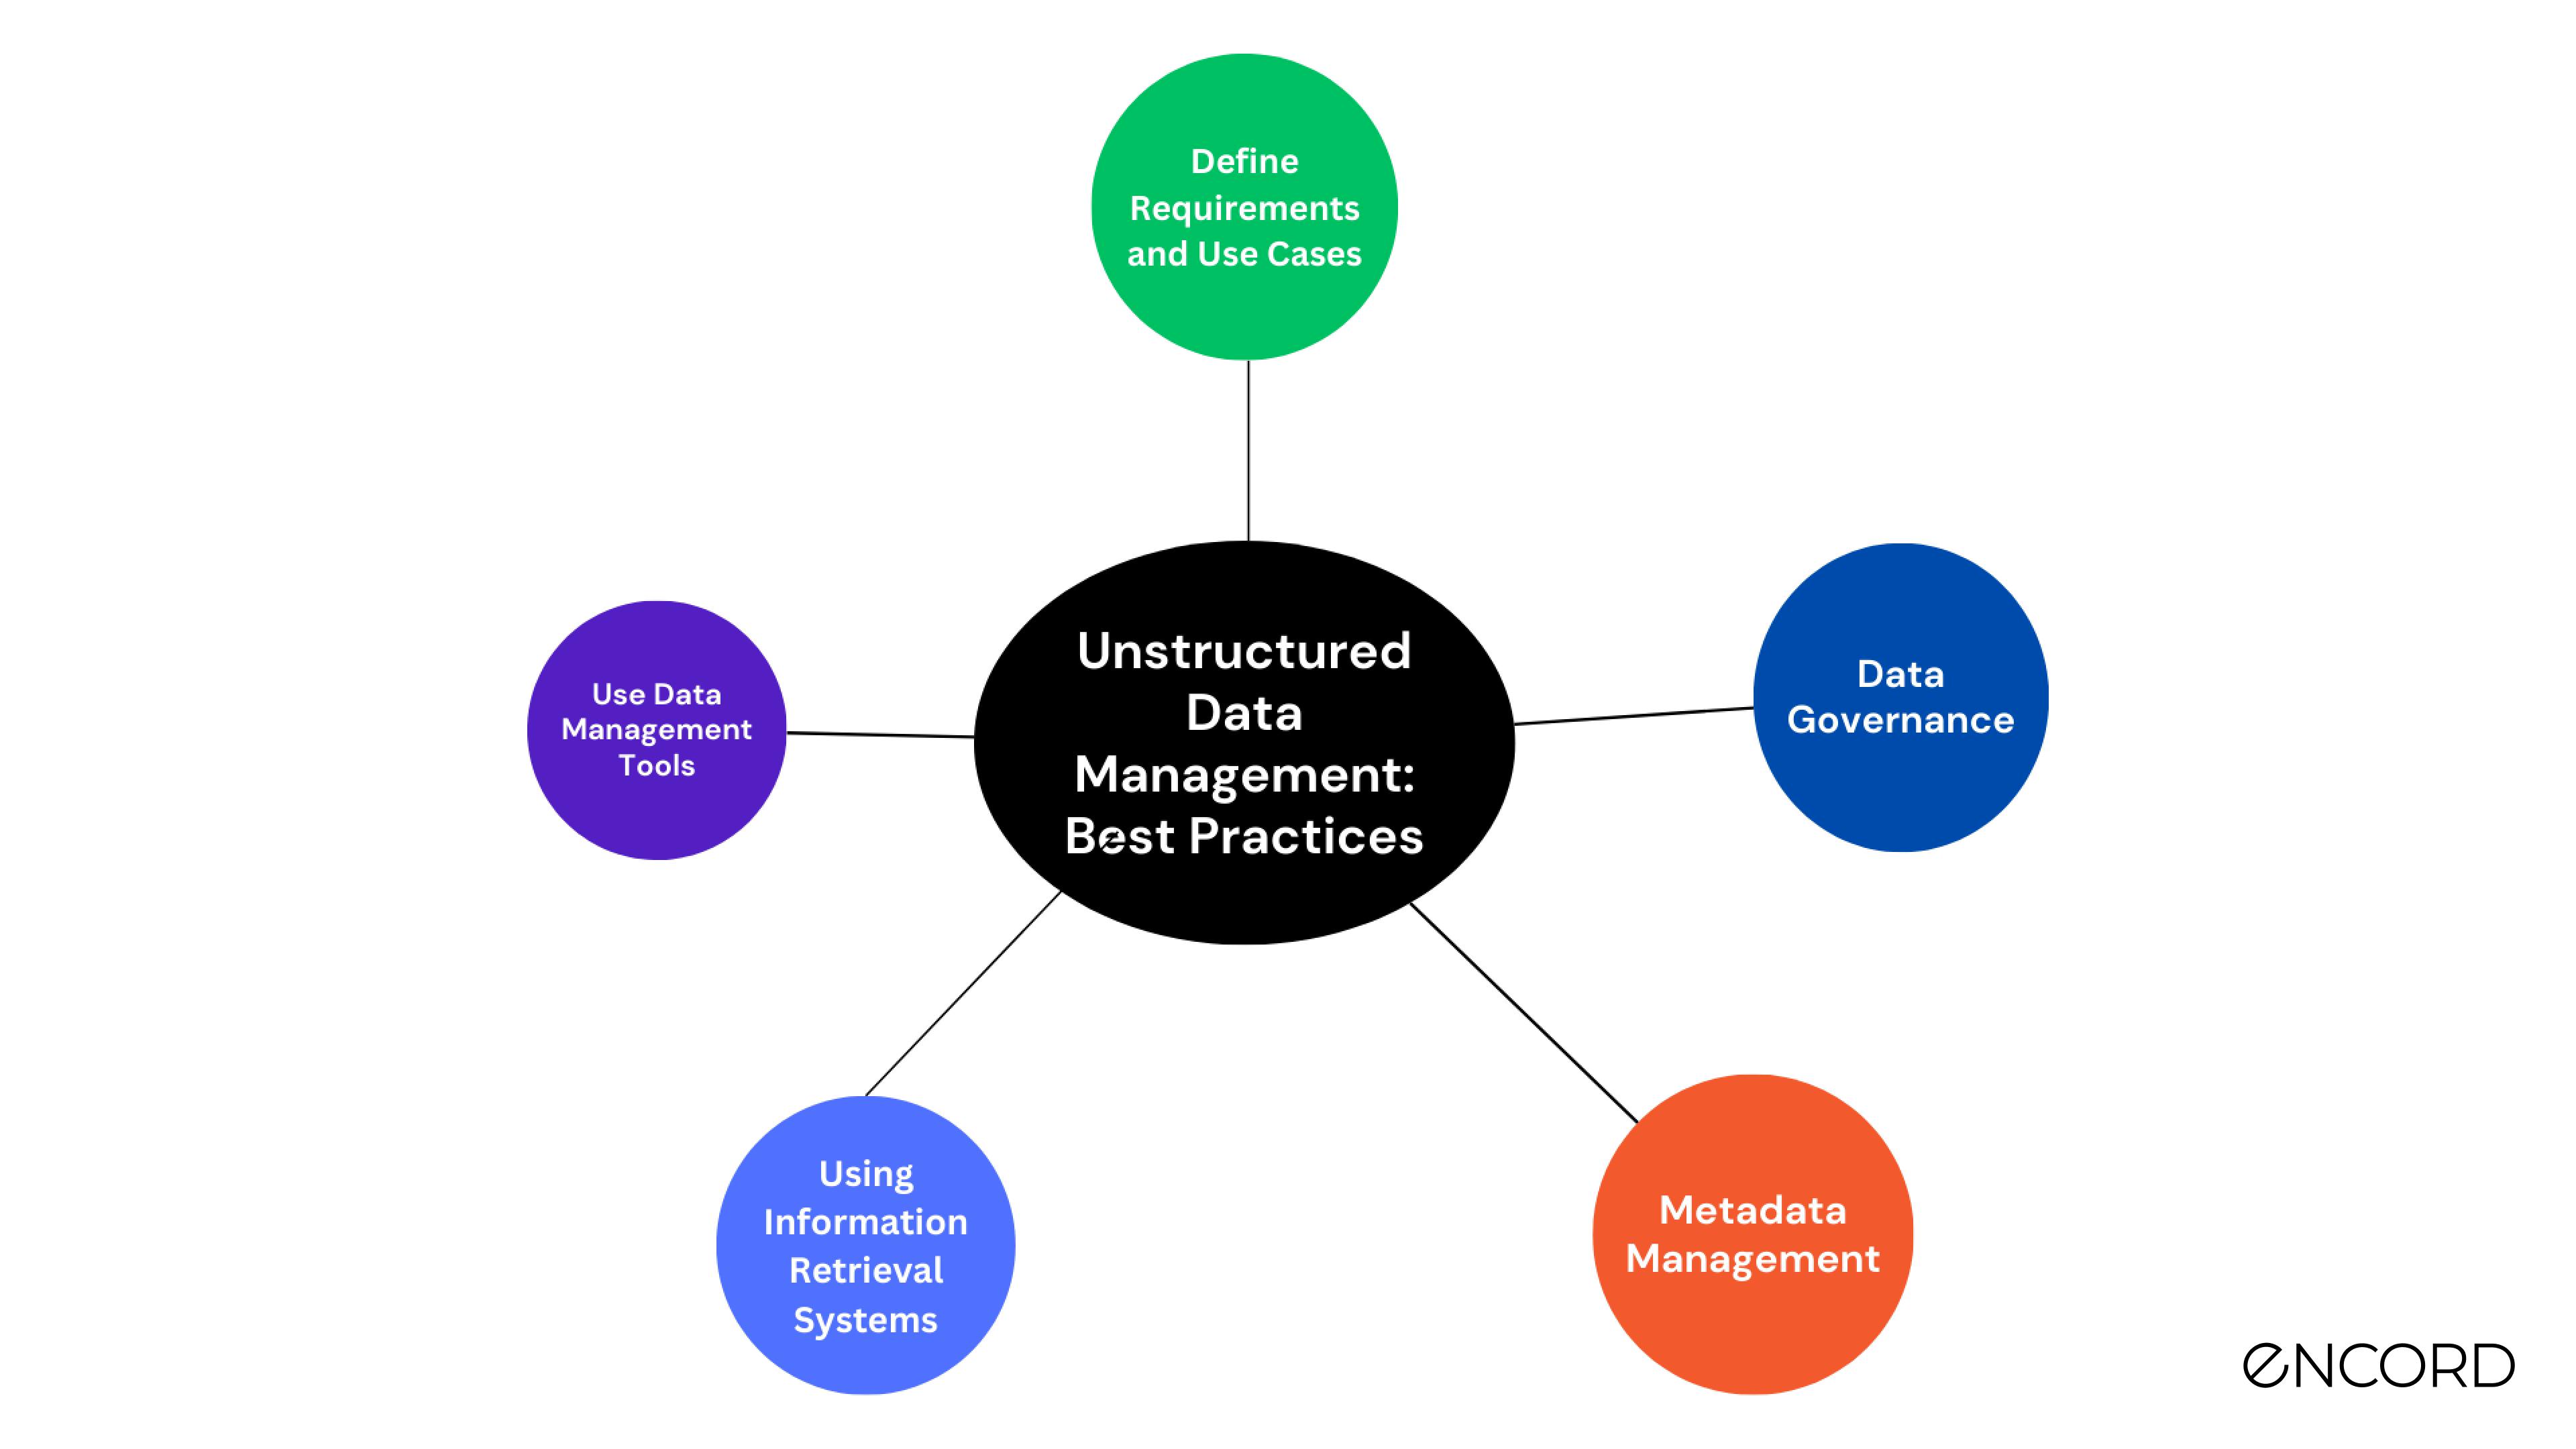 Best practices for unstructured data management